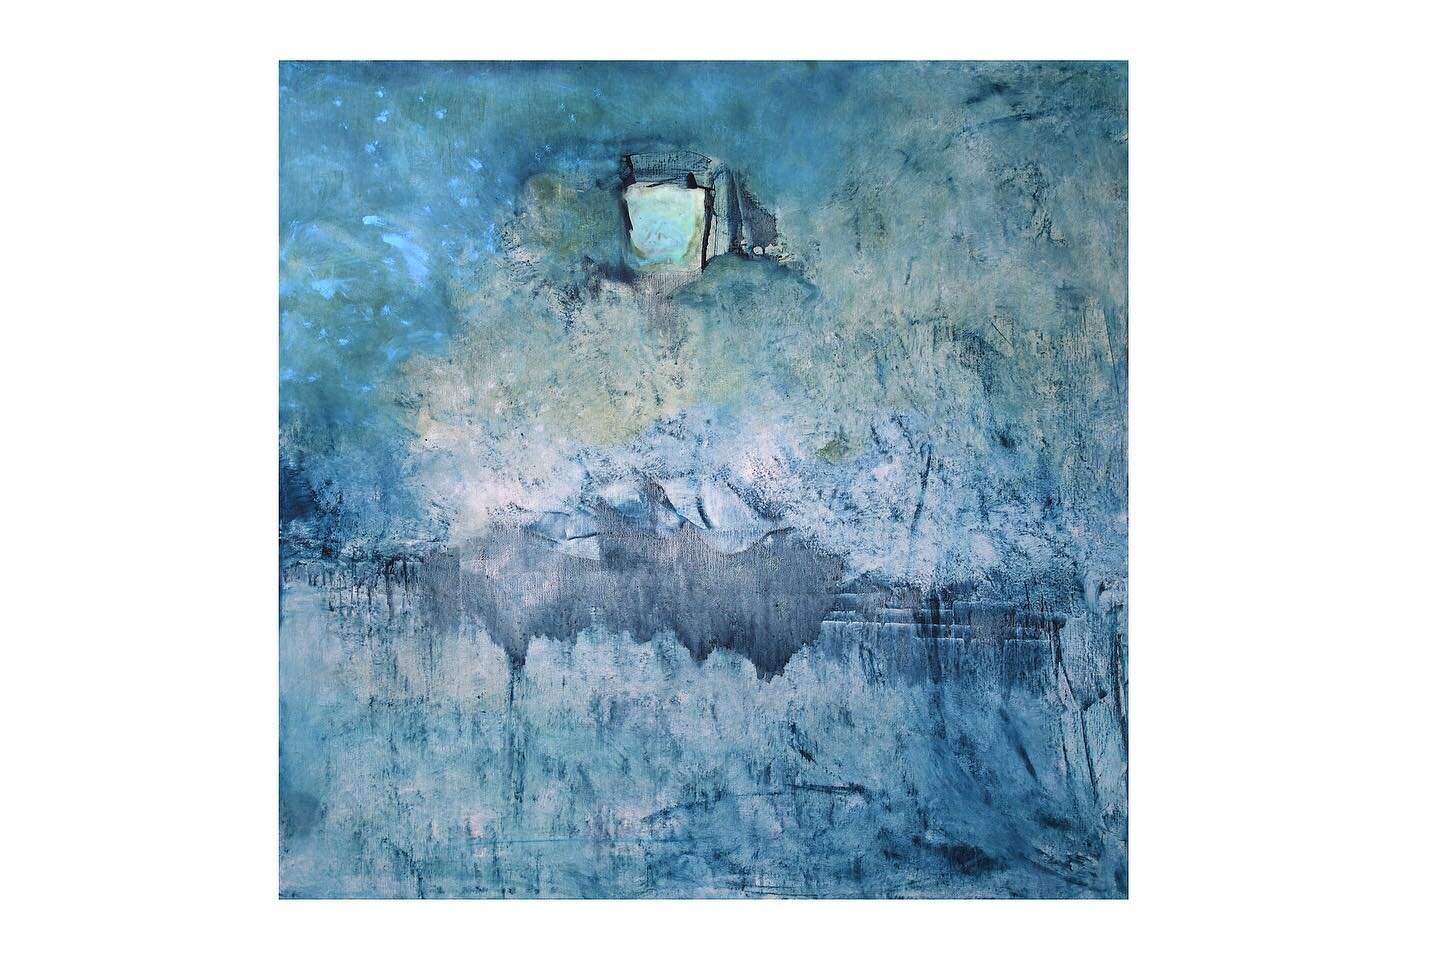 &lsquo;Who looks Inside Awakens&rsquo; delighted this painting recently part of my solo exhibition @luangalleryathlone  has gone to a new home . Wishing the new owners many hours of pleasure #contemporaryirishart #abstractart #irishabstractartist #ir